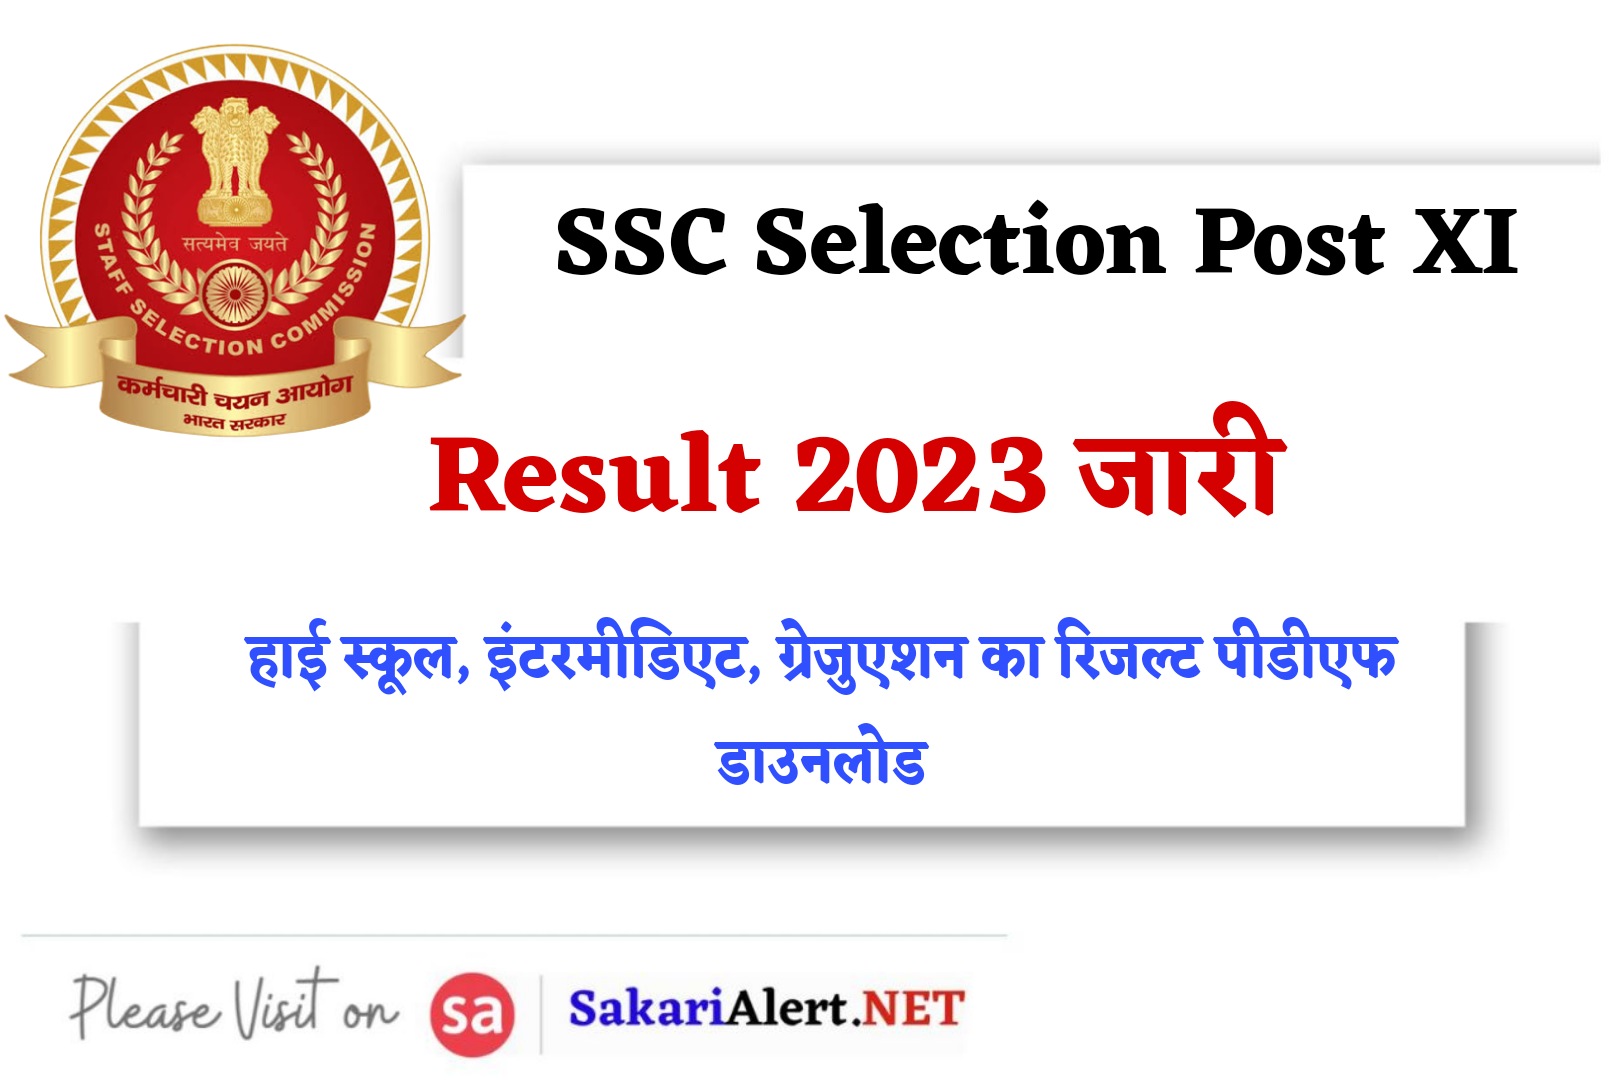 SSC Selection Post XI Result 2023